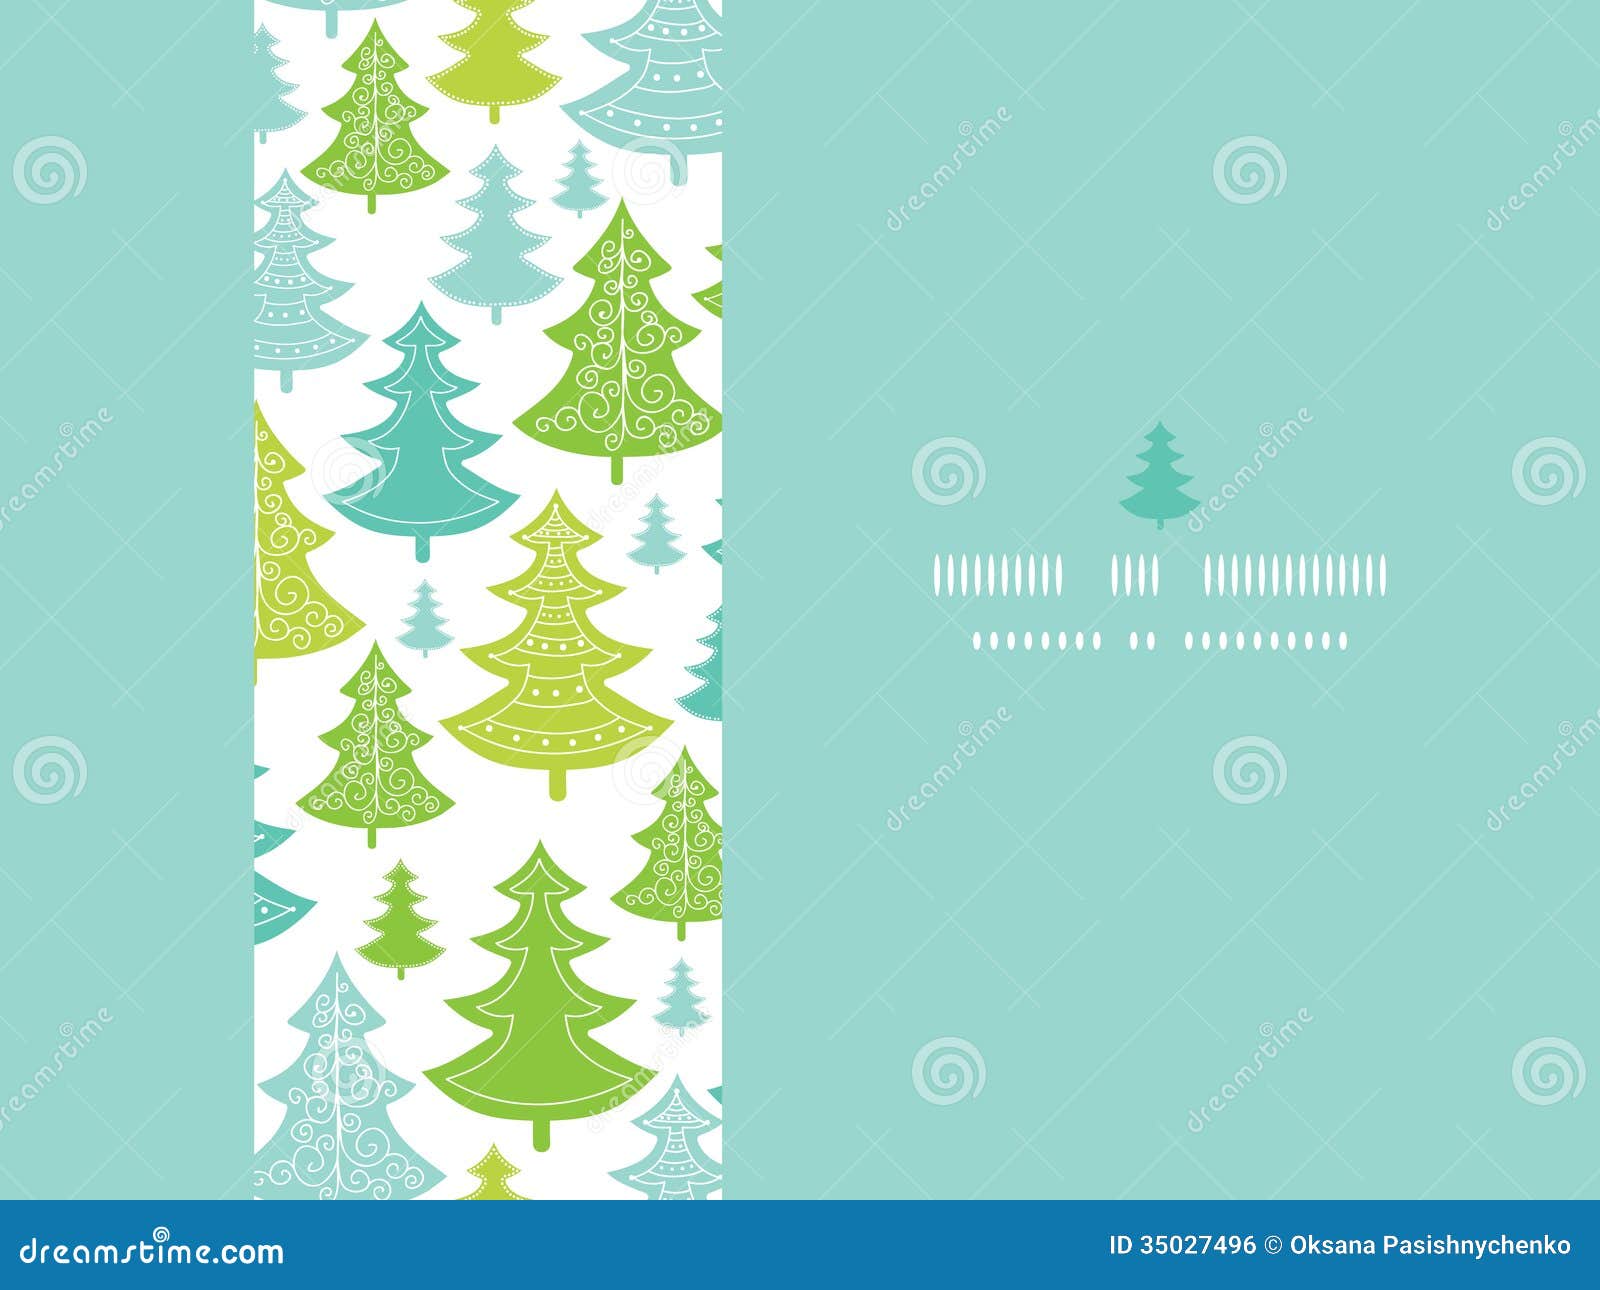 Vector holiday Christmas trees horizontal seamless pattern background with hand drawn elements